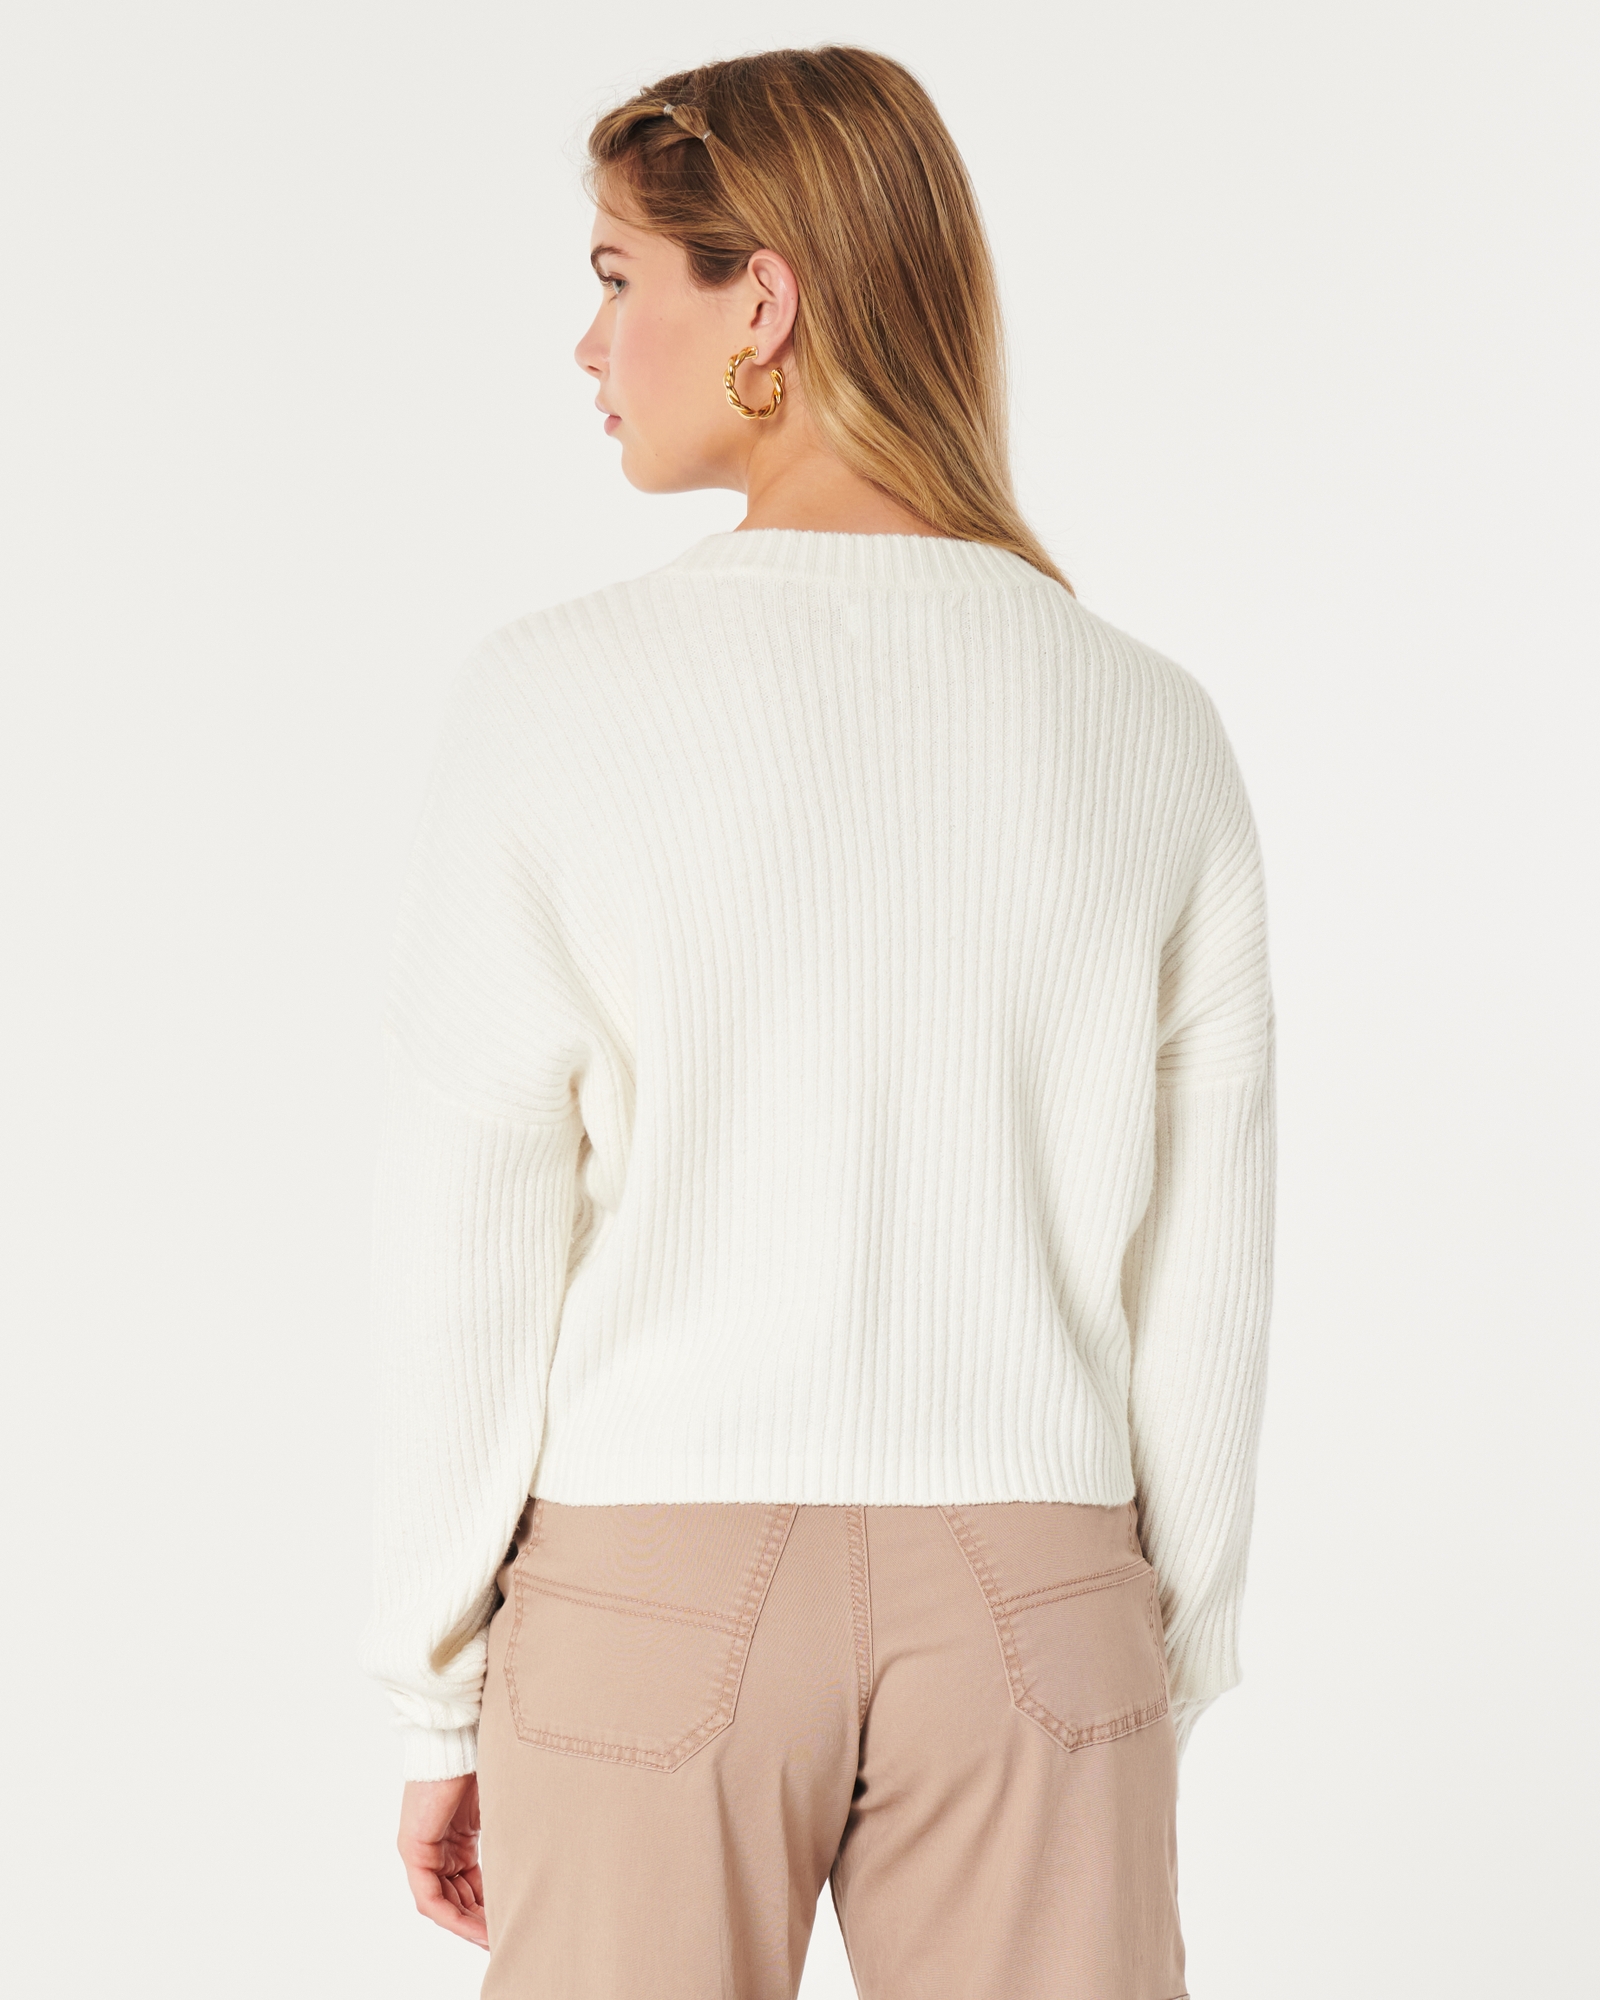 Women's Easy Cozy Ribbed Crew Sweater, Women's Clearance